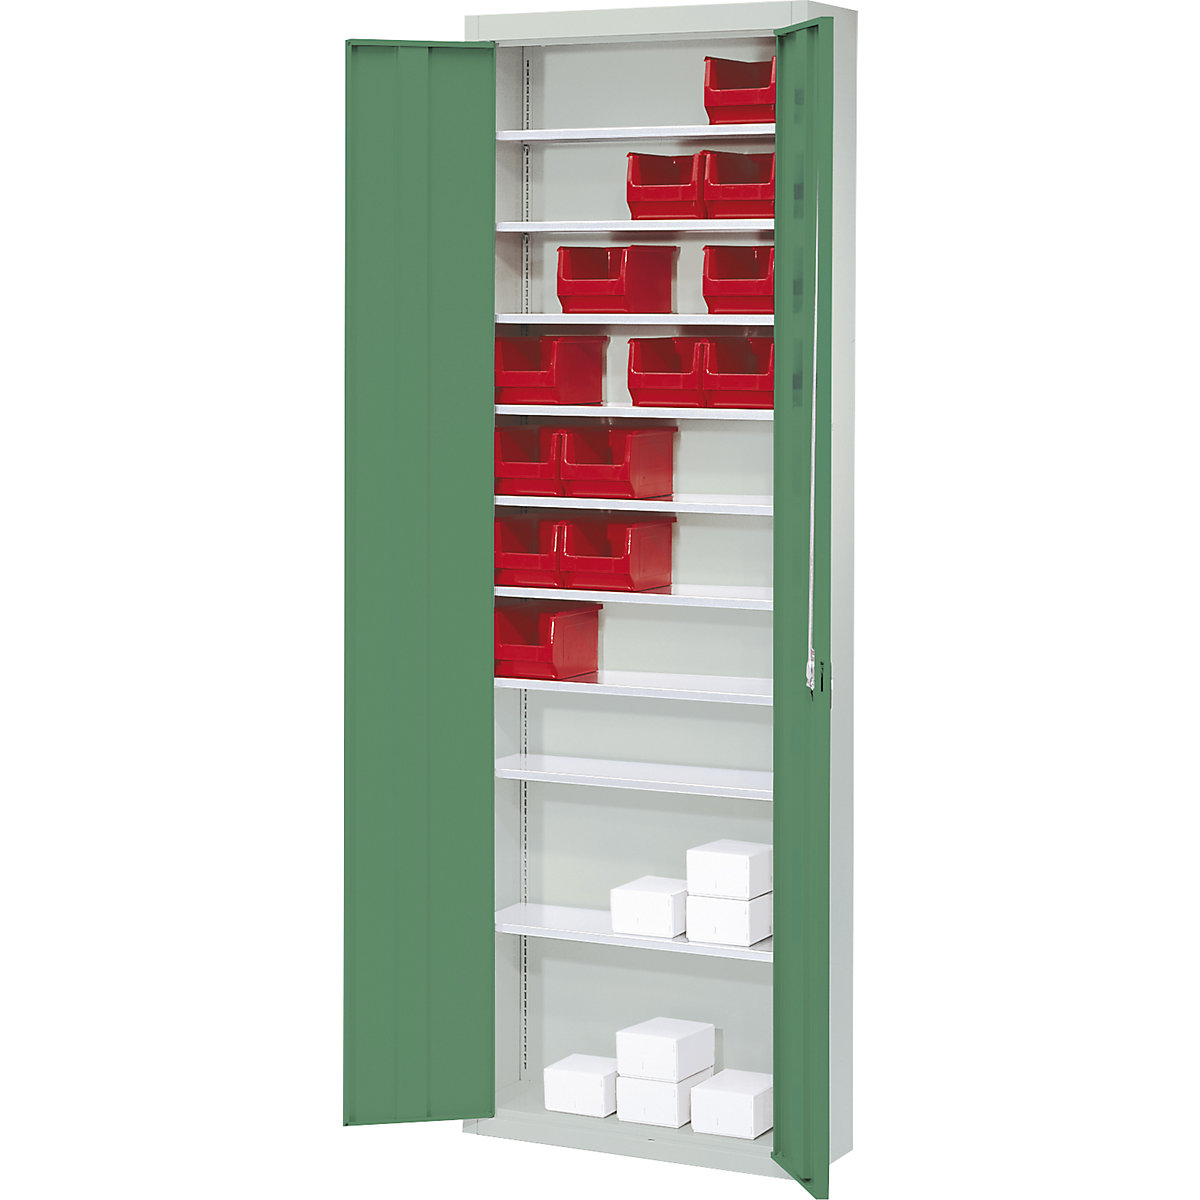 Storage cupboard, without open fronted storage bins – mauser, HxWxD 2150 x 680 x 280 mm, two-colour, grey body, green doors-6